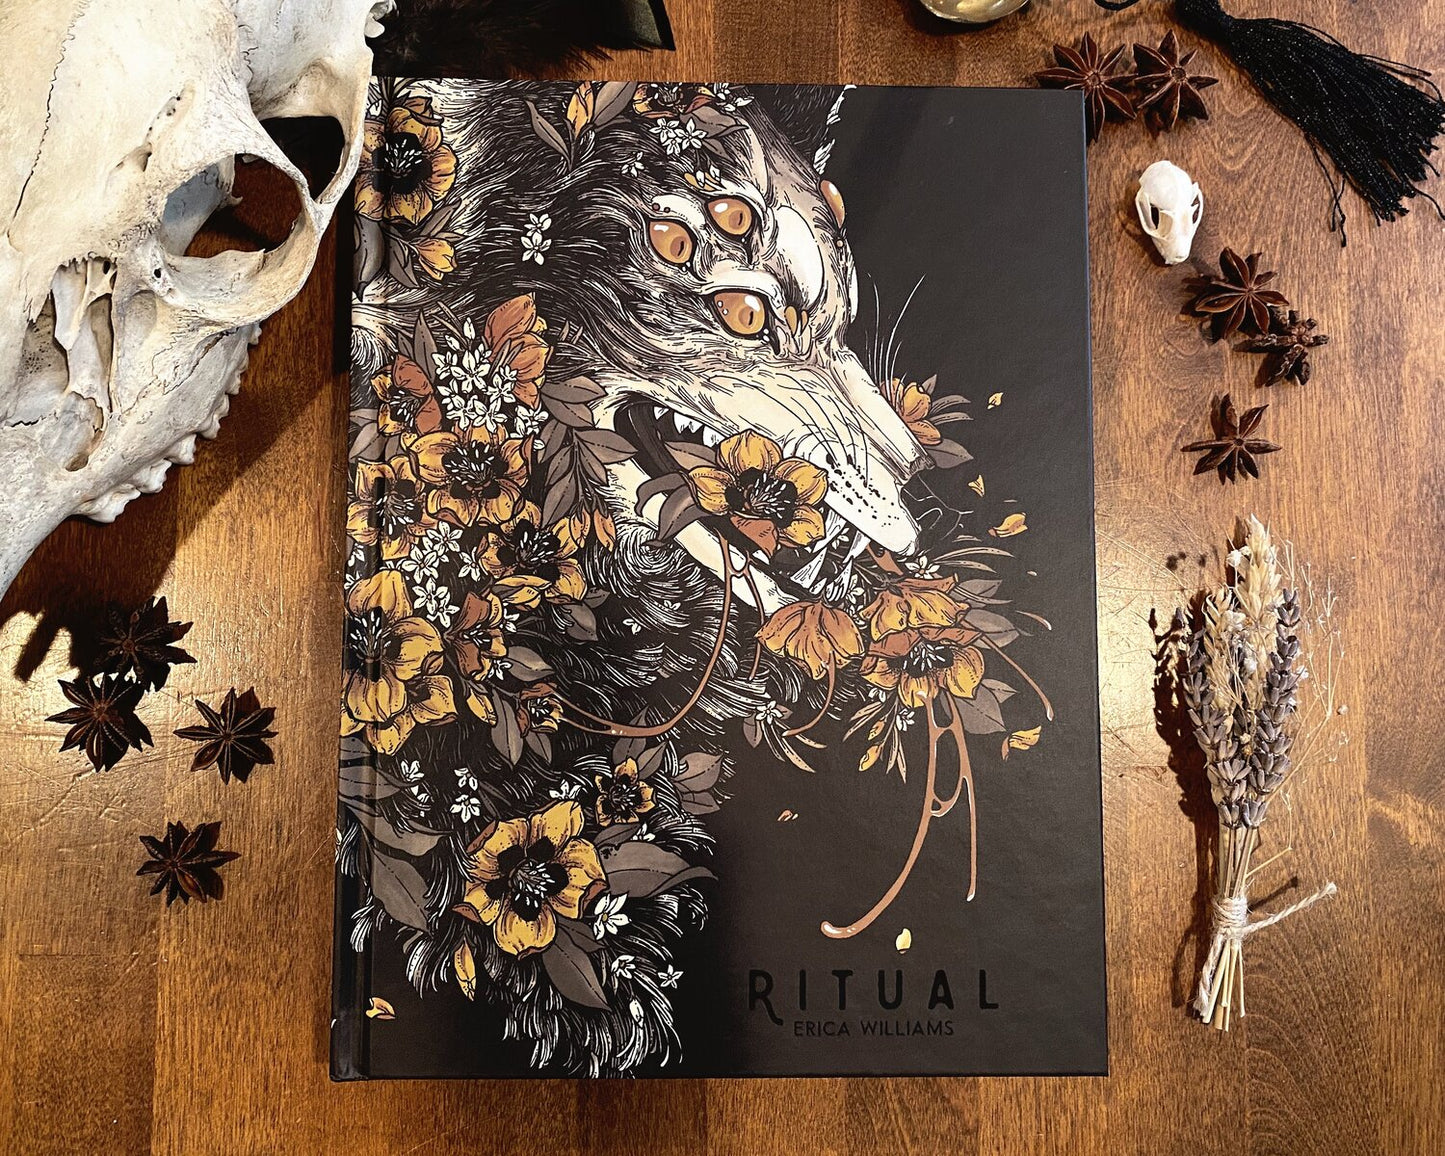 Photograph of the art book ritual. The cover shows a multieyed wolf overgrown with flowers. On the table are animal skulls, star anise, and a bundle of lavender.